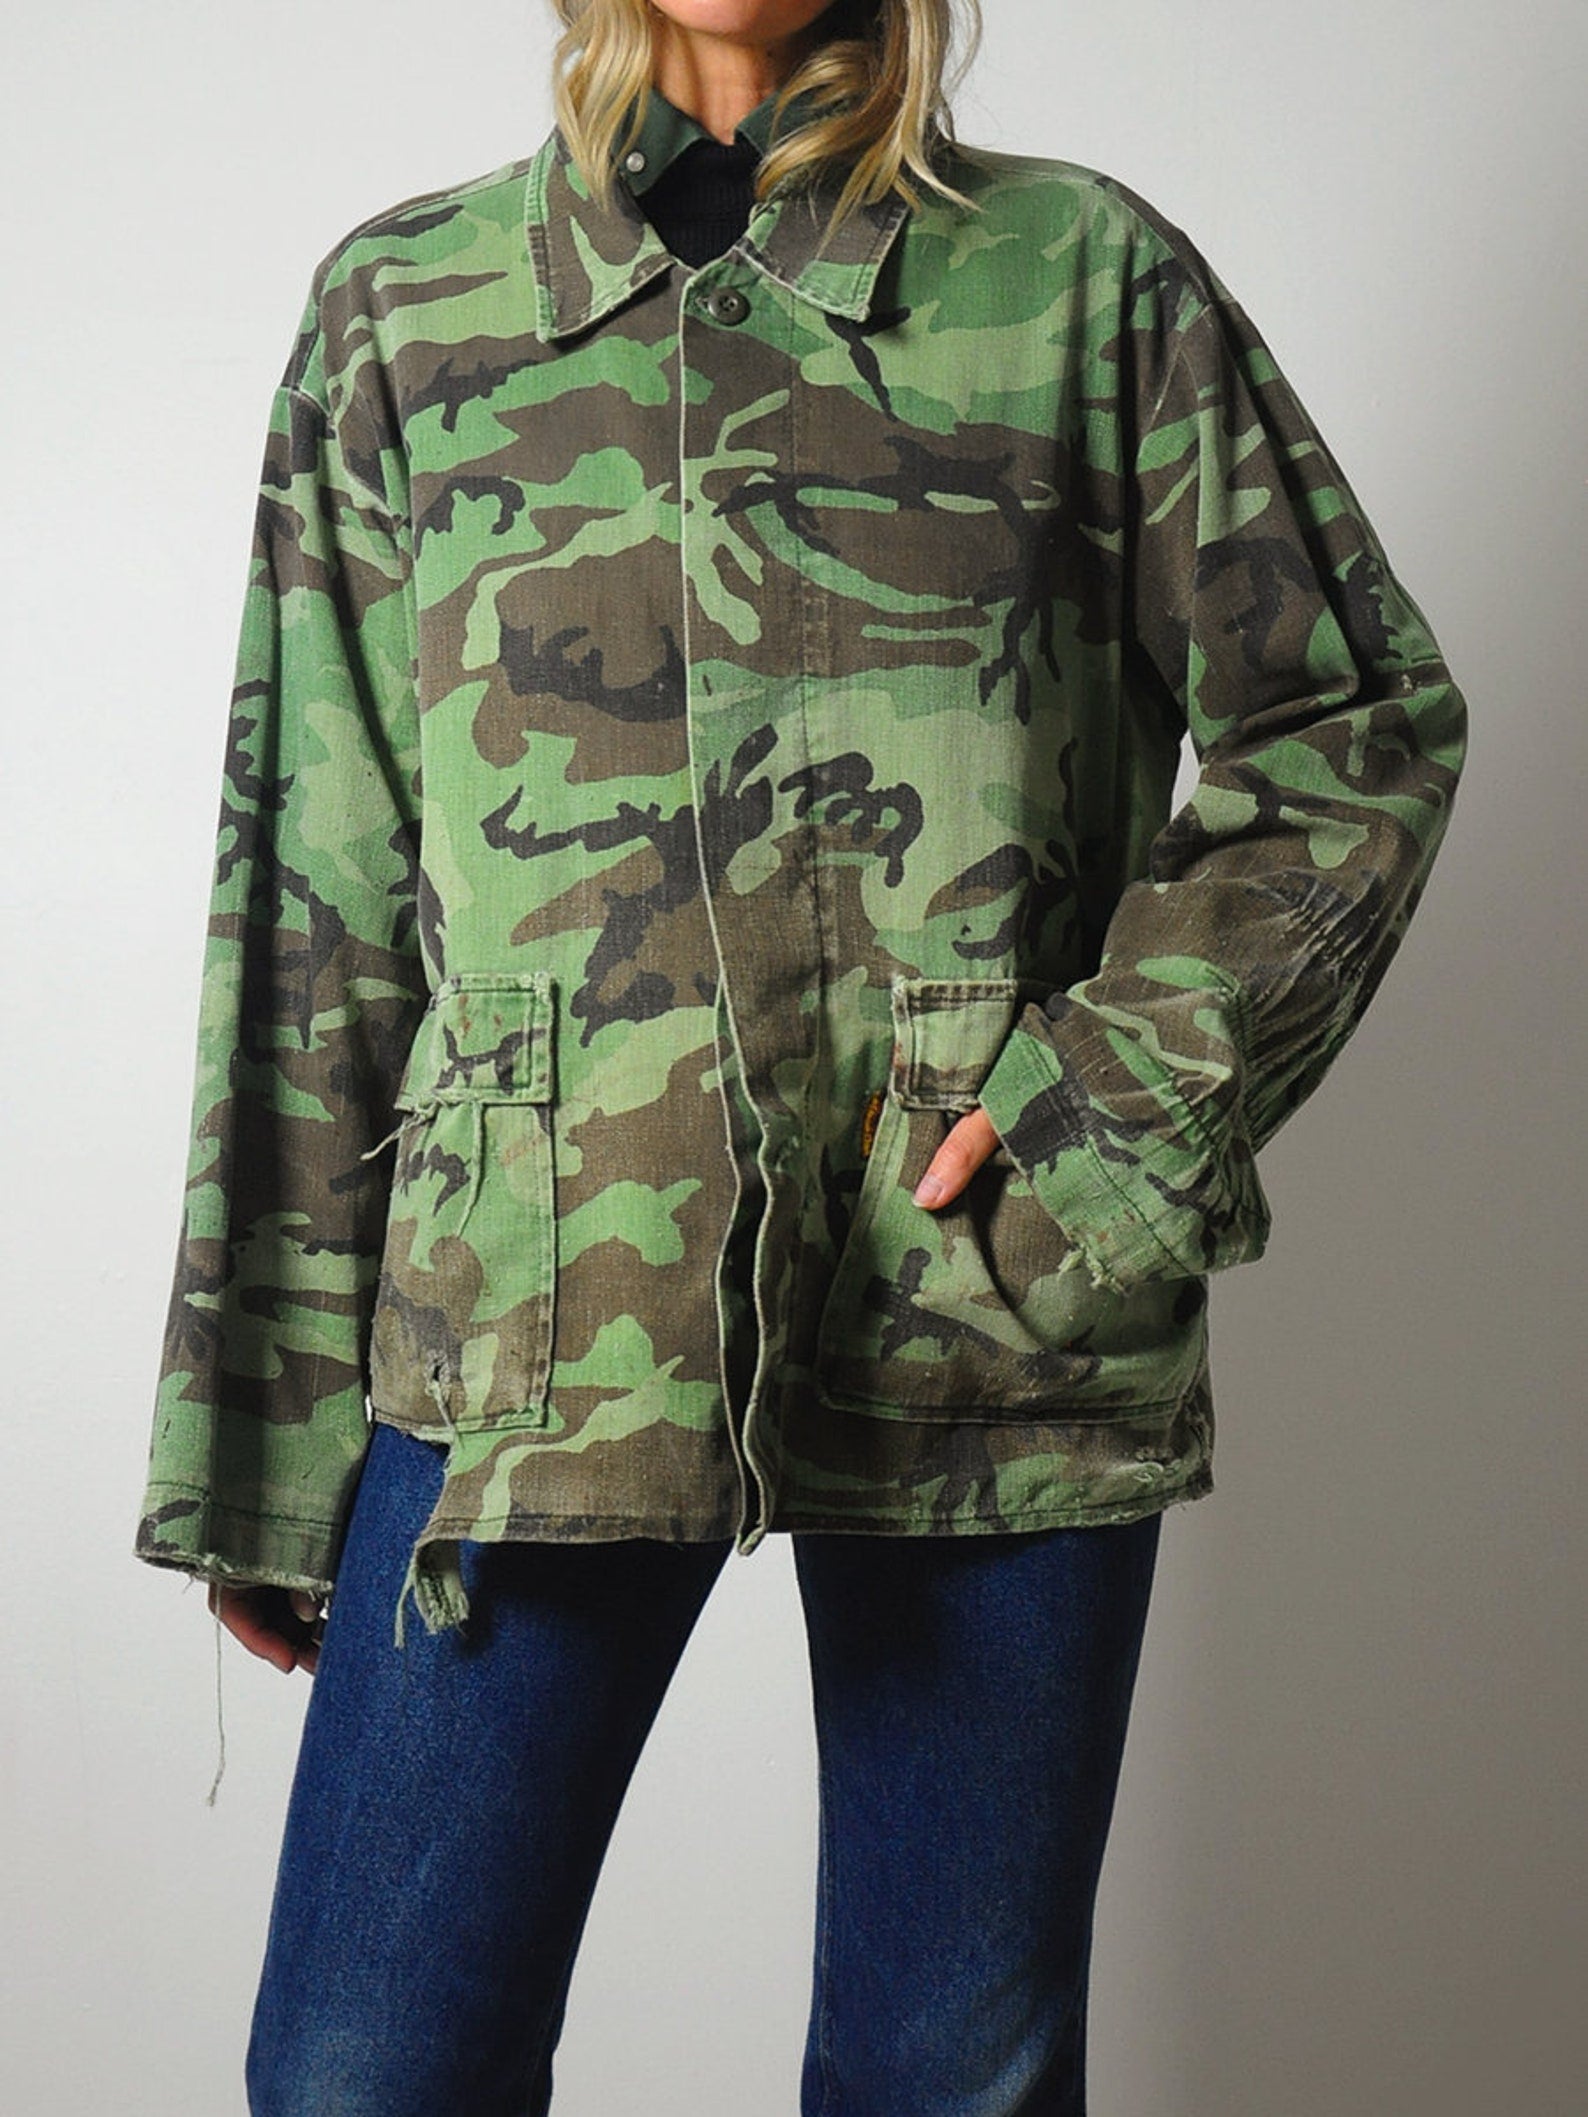 1980's Distressed Camouflage Jacket